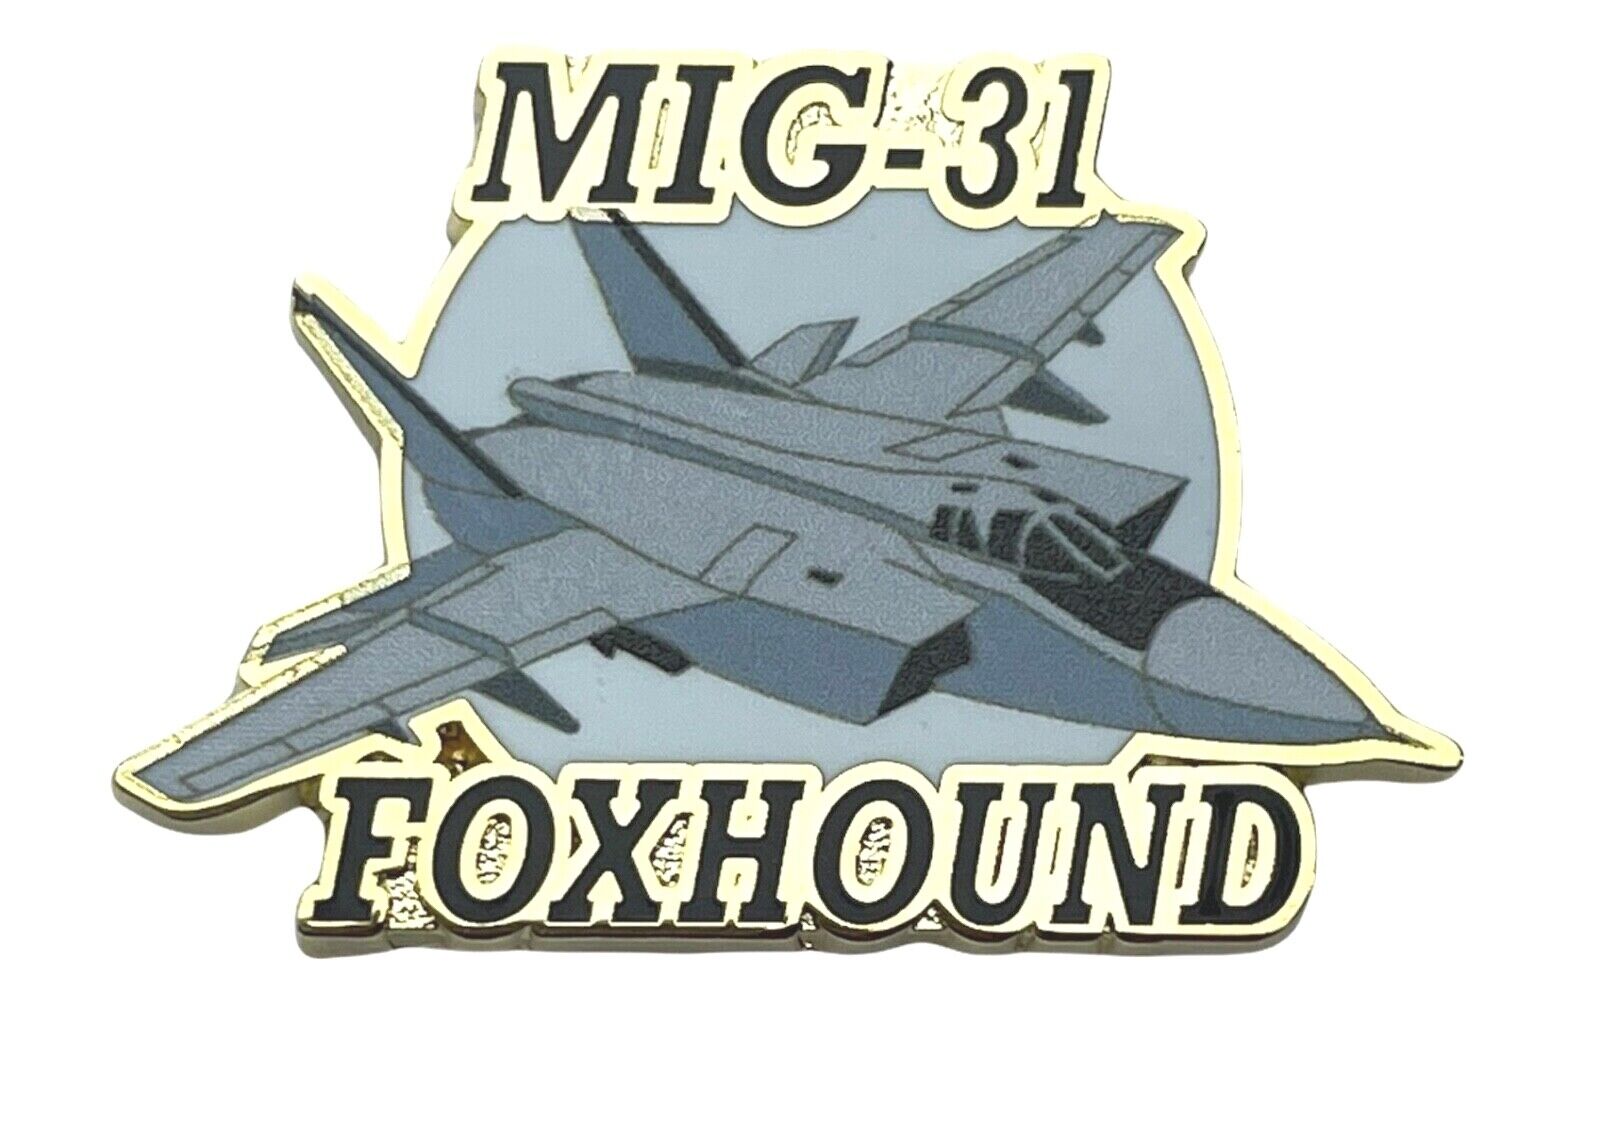 USSR Mig-31 Foxhound Fighter Jet Plane 1 1/2 inch pin EE62712 F6D32K